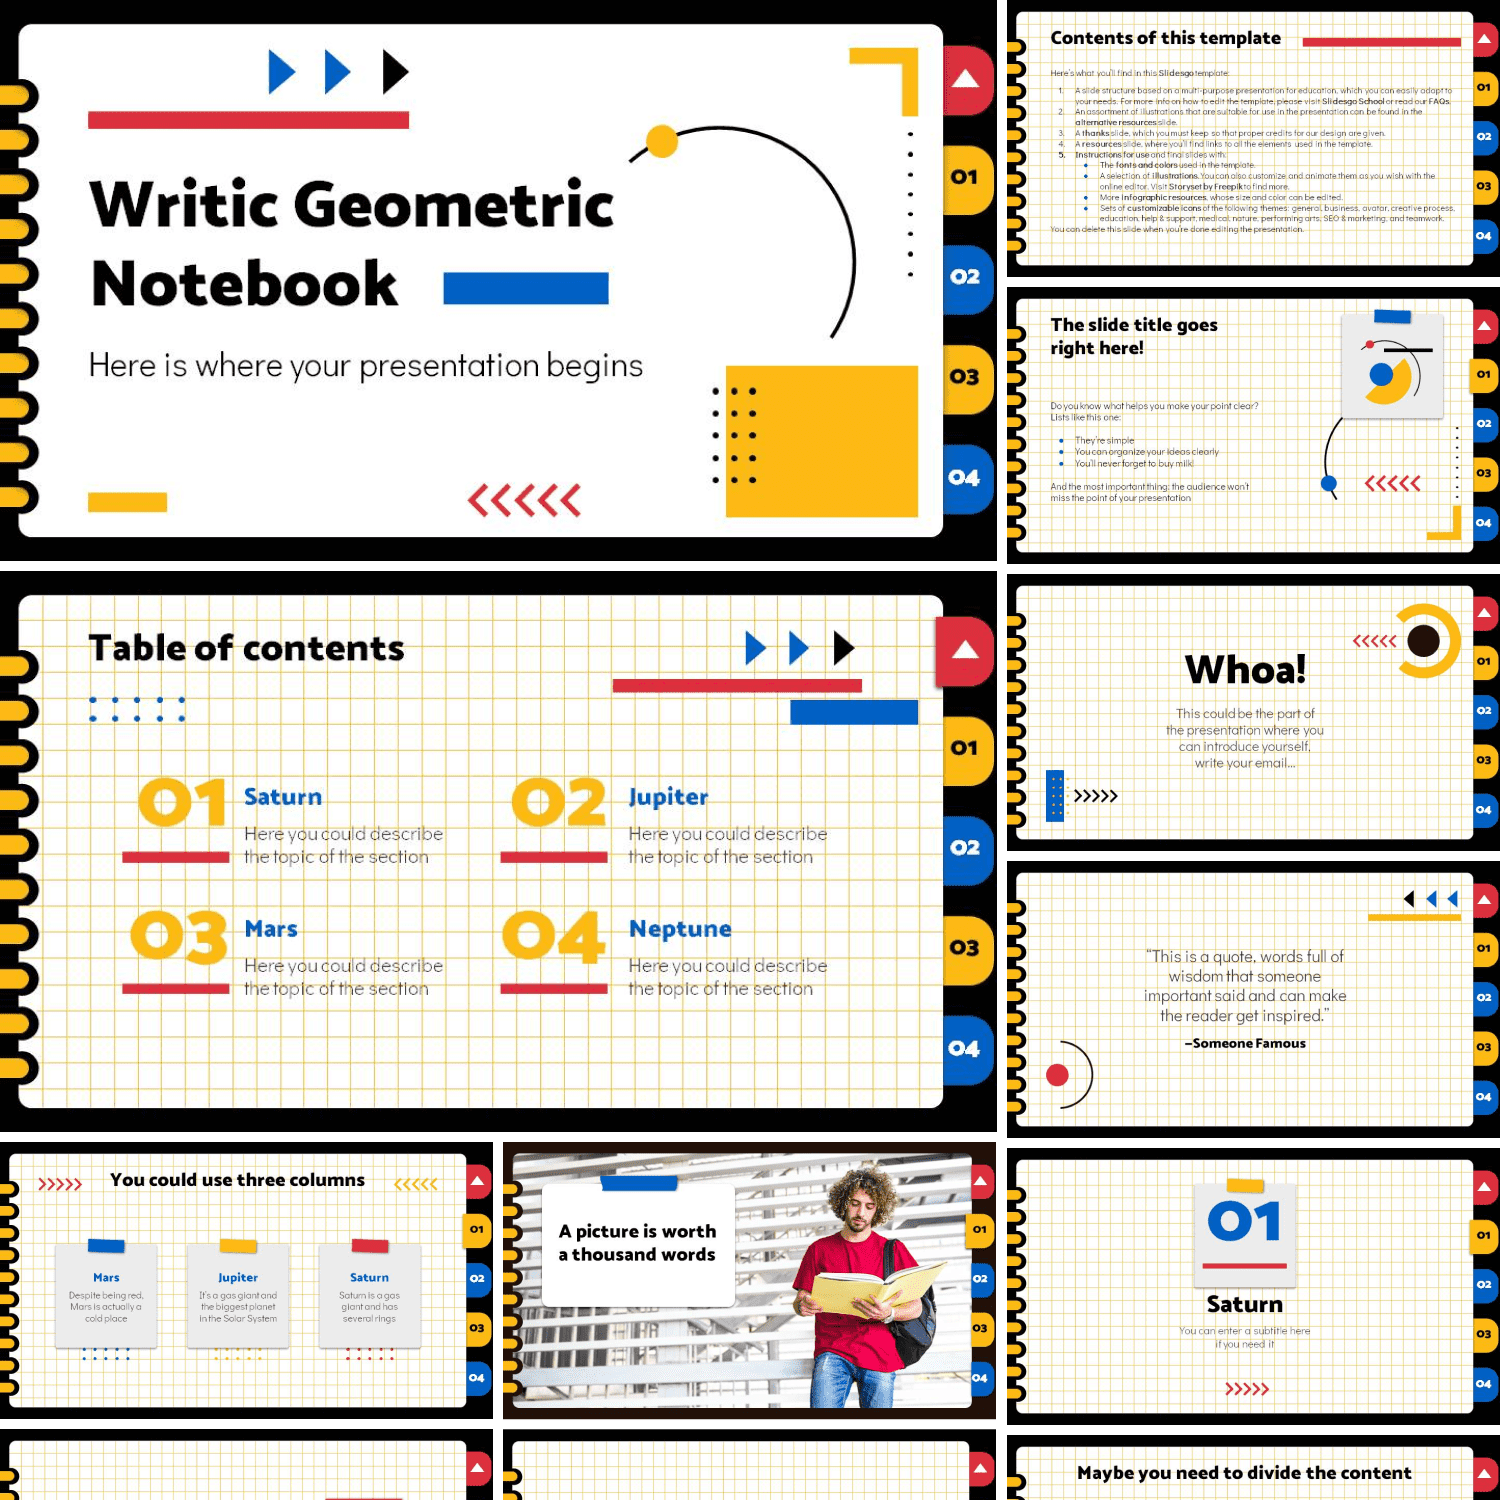 Main preview image for Writic Geometric Notebook PowerPoint Presentation by MasterBundles.